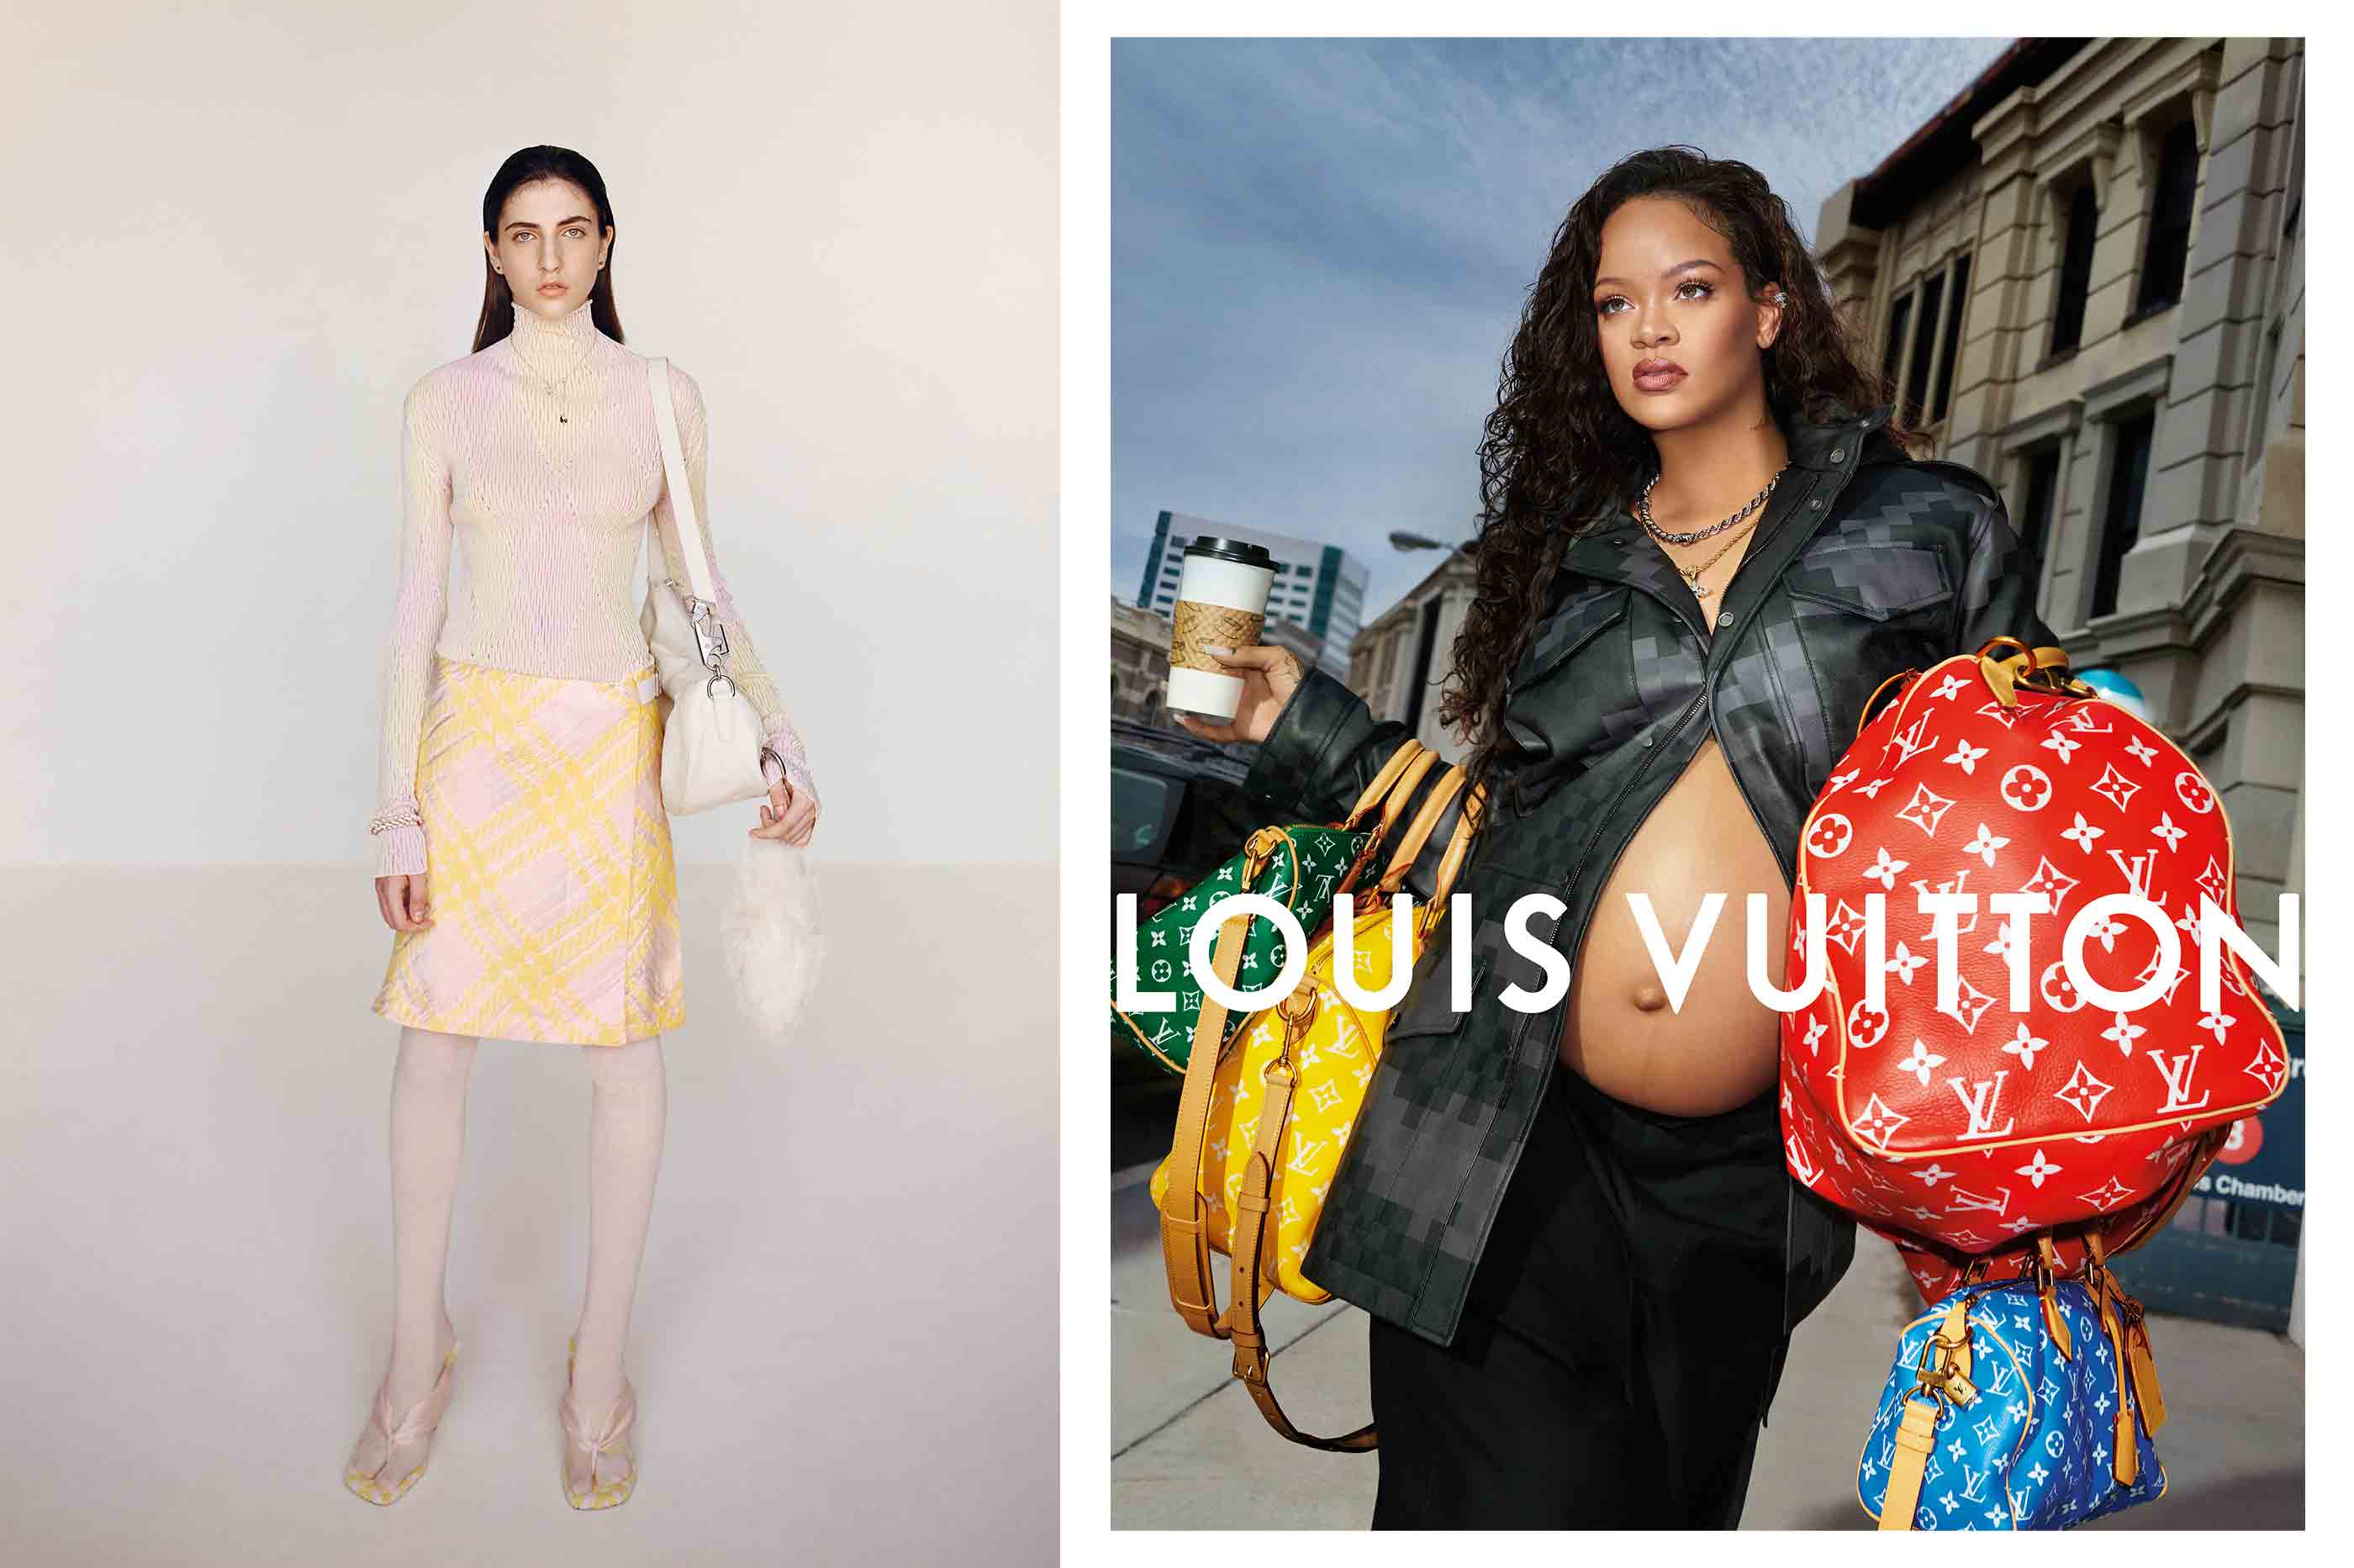 Rihanna Models Pharrell's Louis Vuitton Collection In New Ad